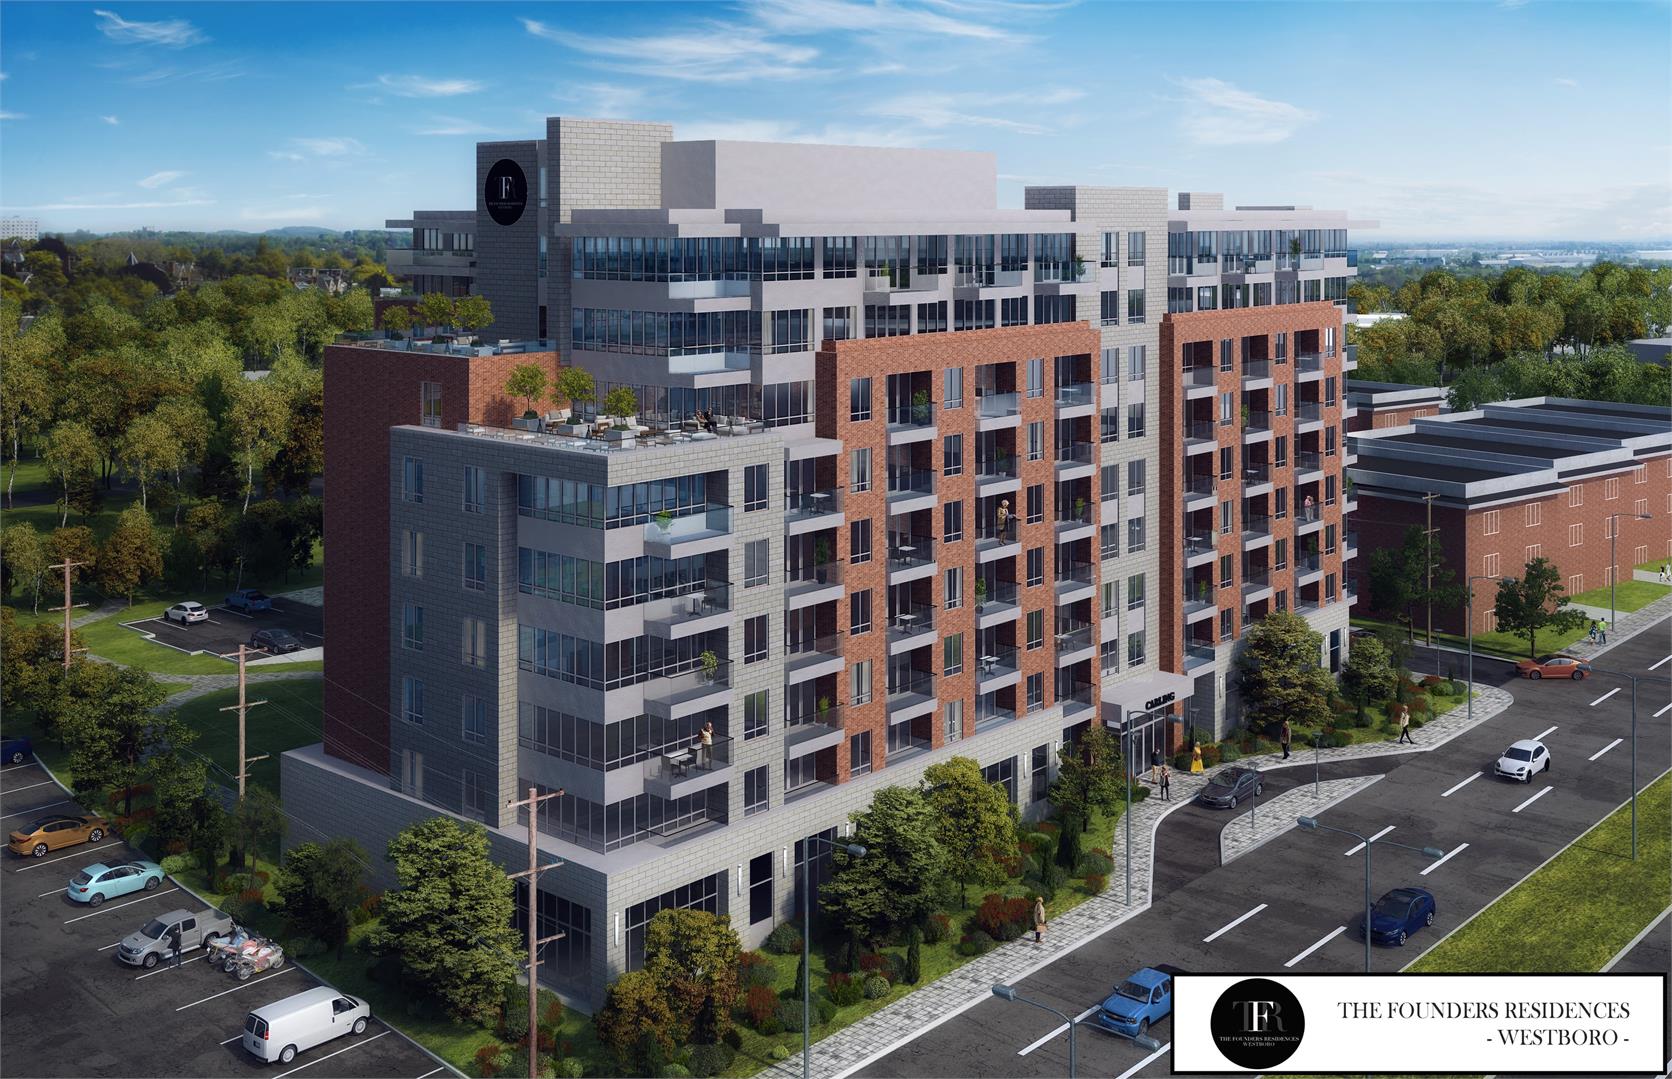 The Founders Residences Westboro